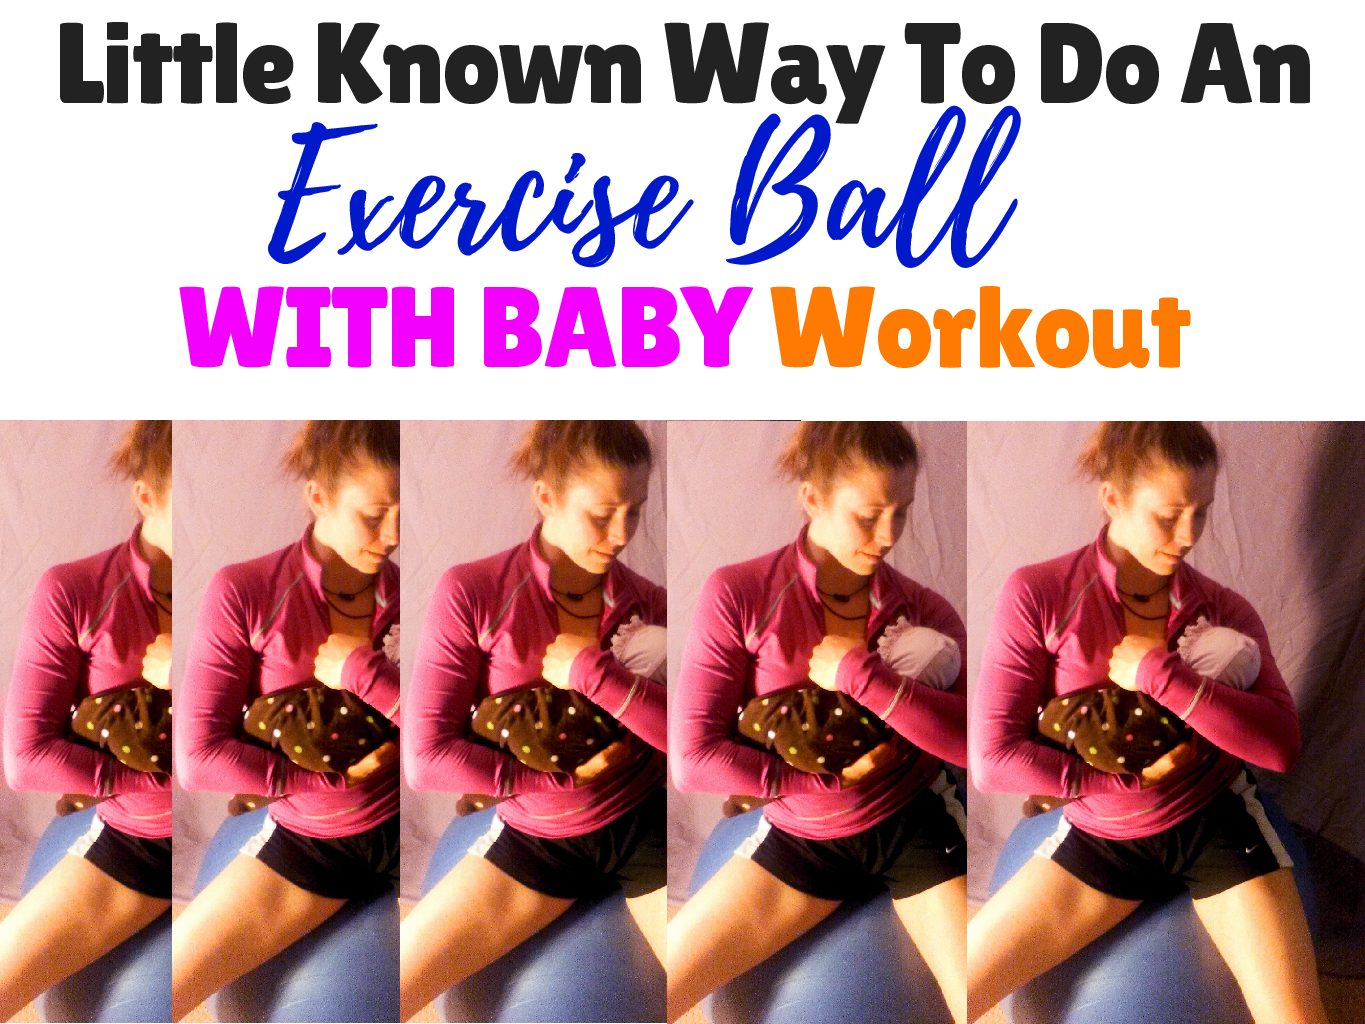 Awesome Exercise Ball With Baby Workout: Legs and Butt